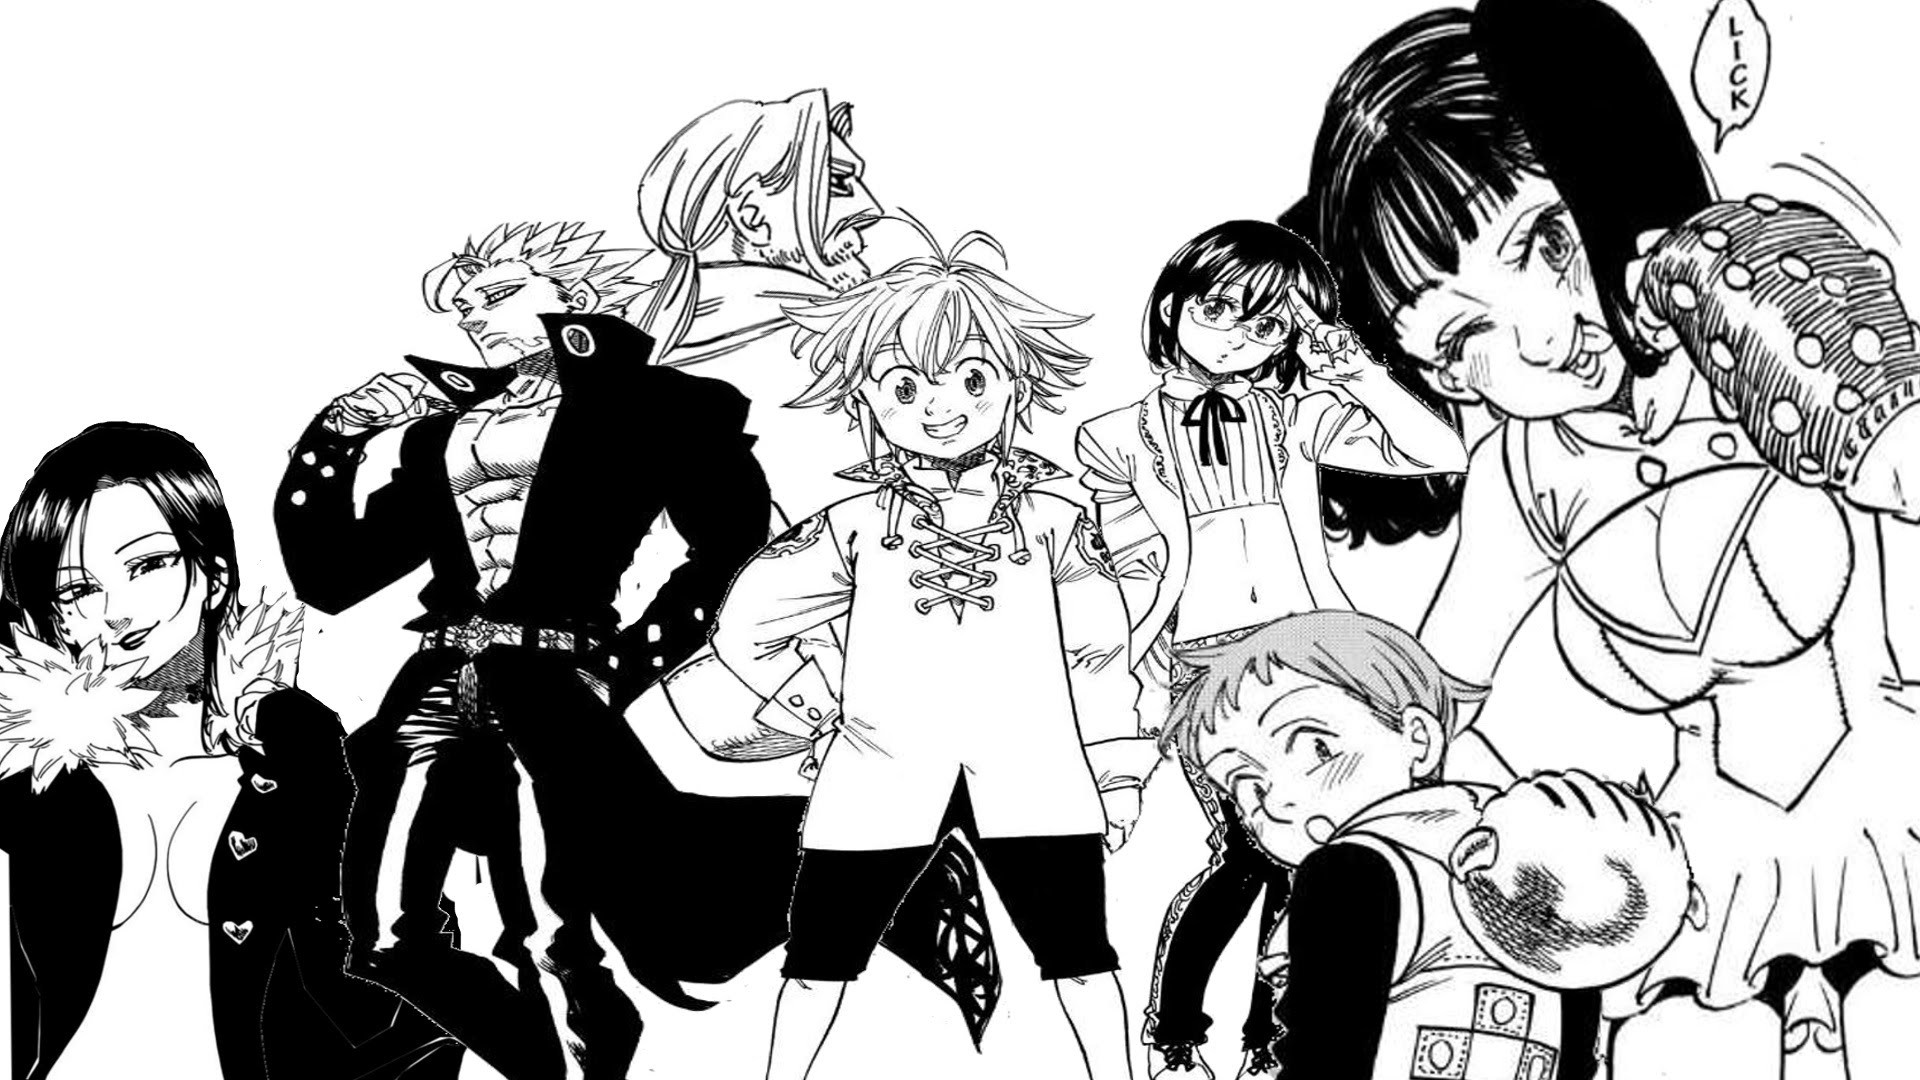 From left to right: Merlin, Ban, Escanor, Meliodas, Gowther, King